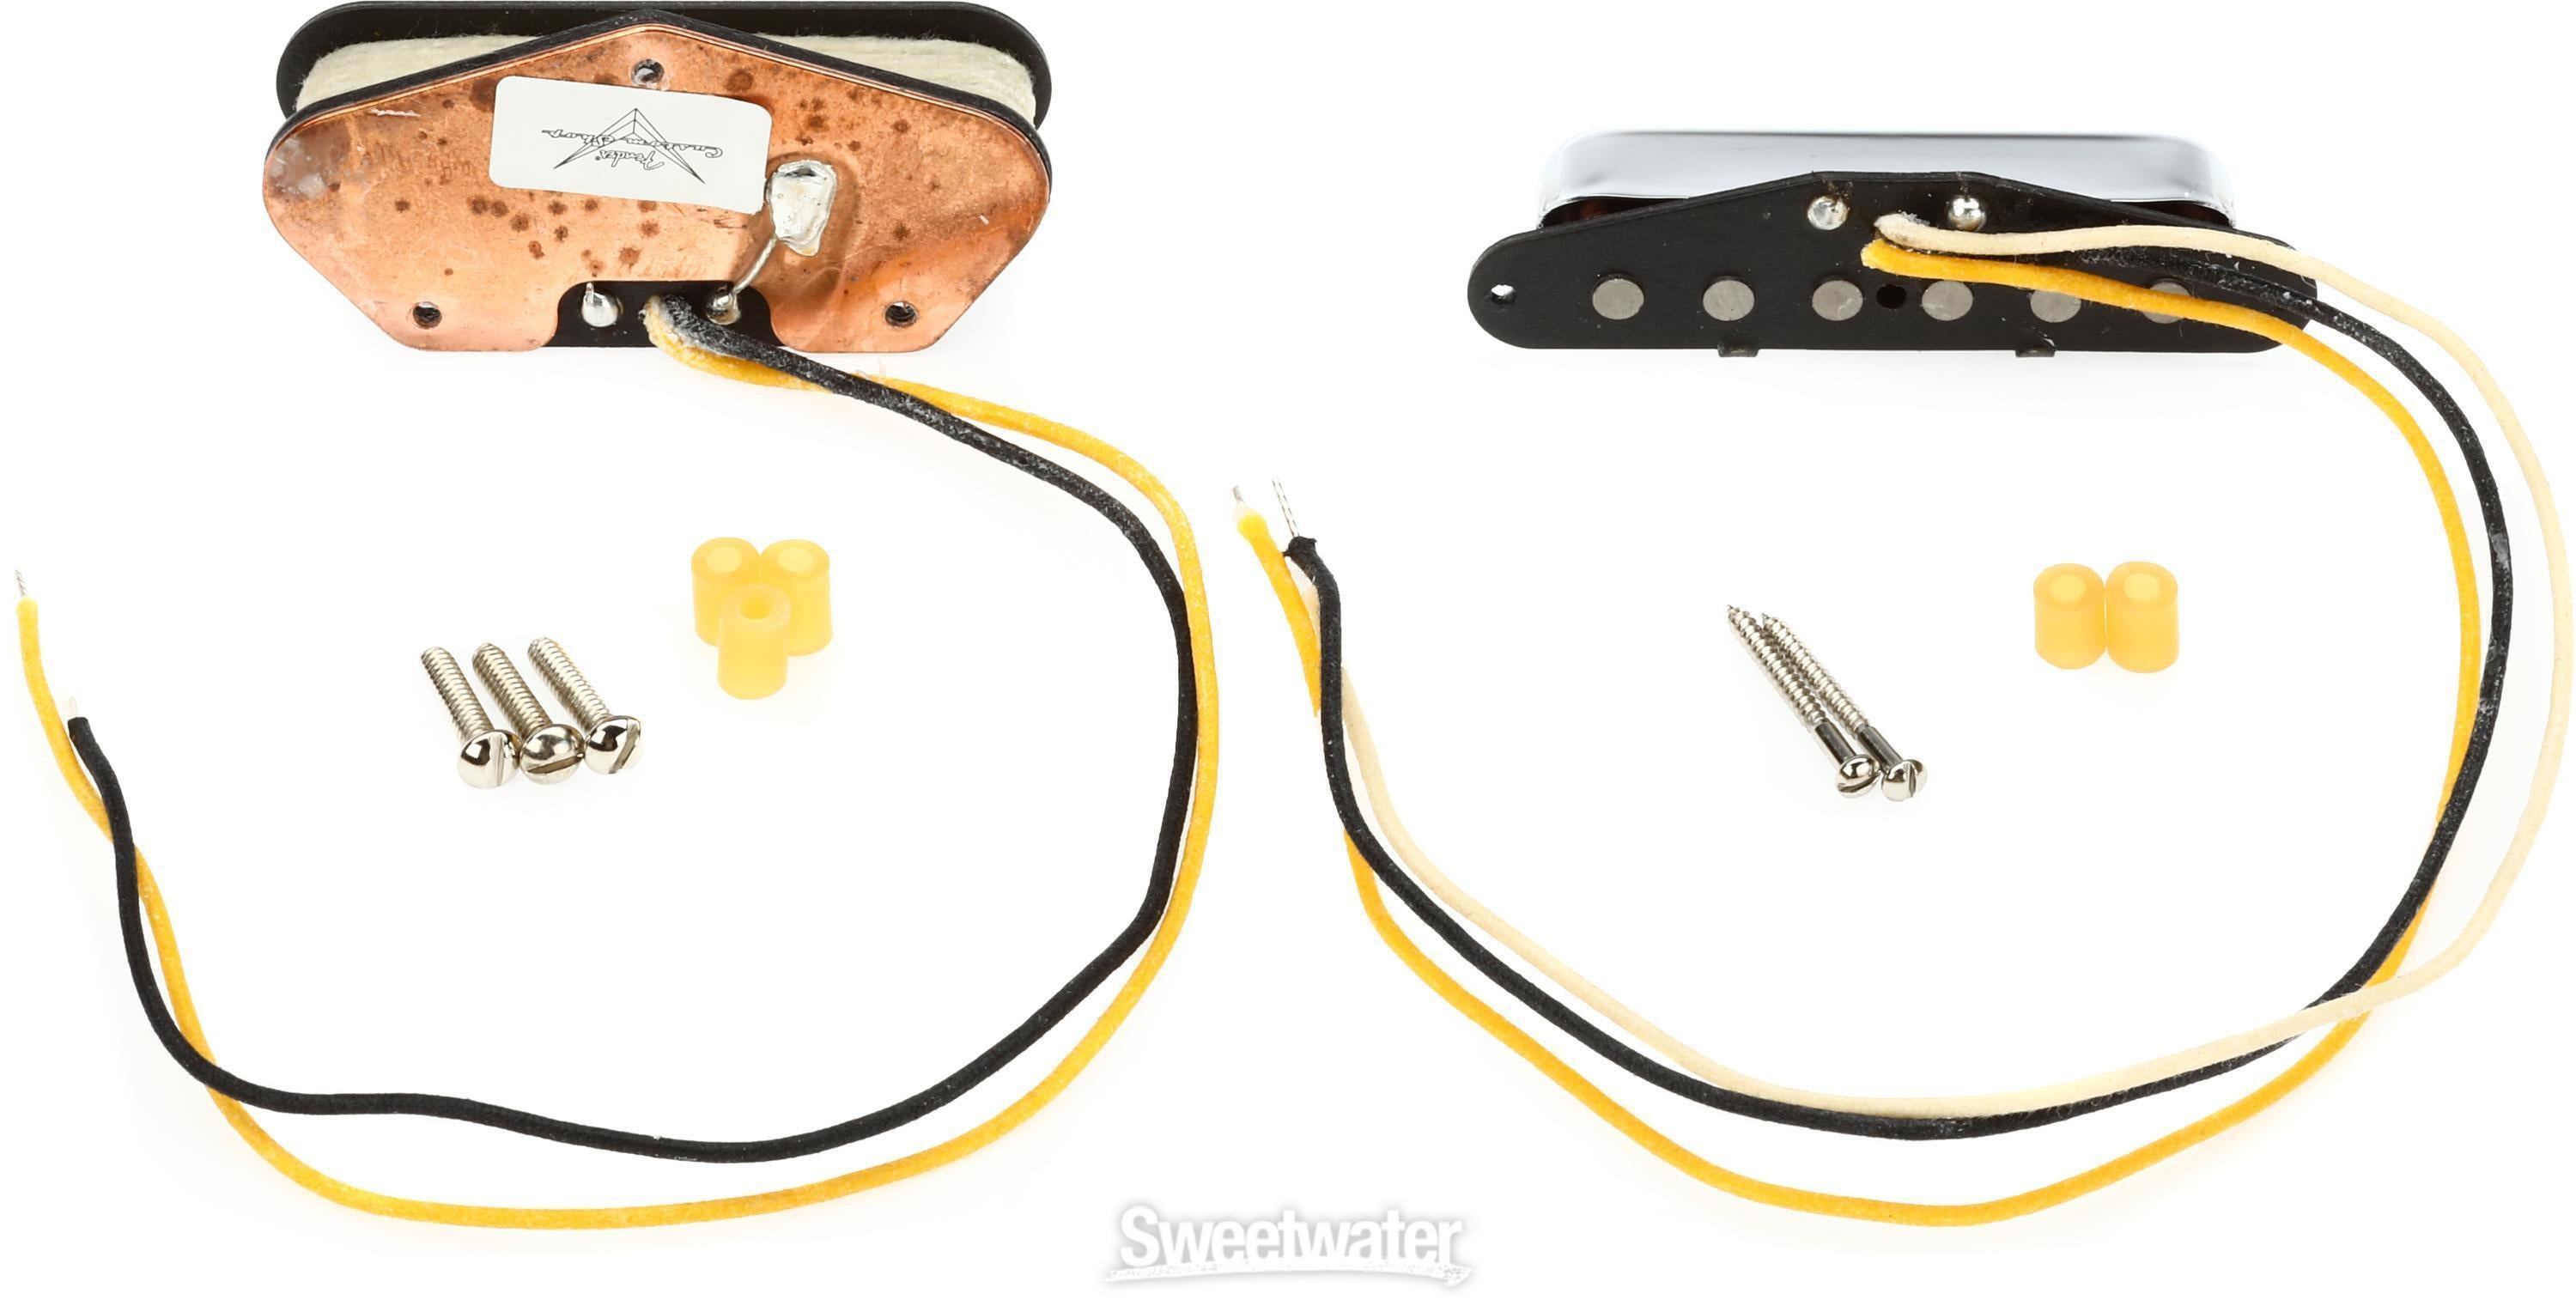 Fender Texas Special Telecaster 2-piece Pickup Set | Sweetwater